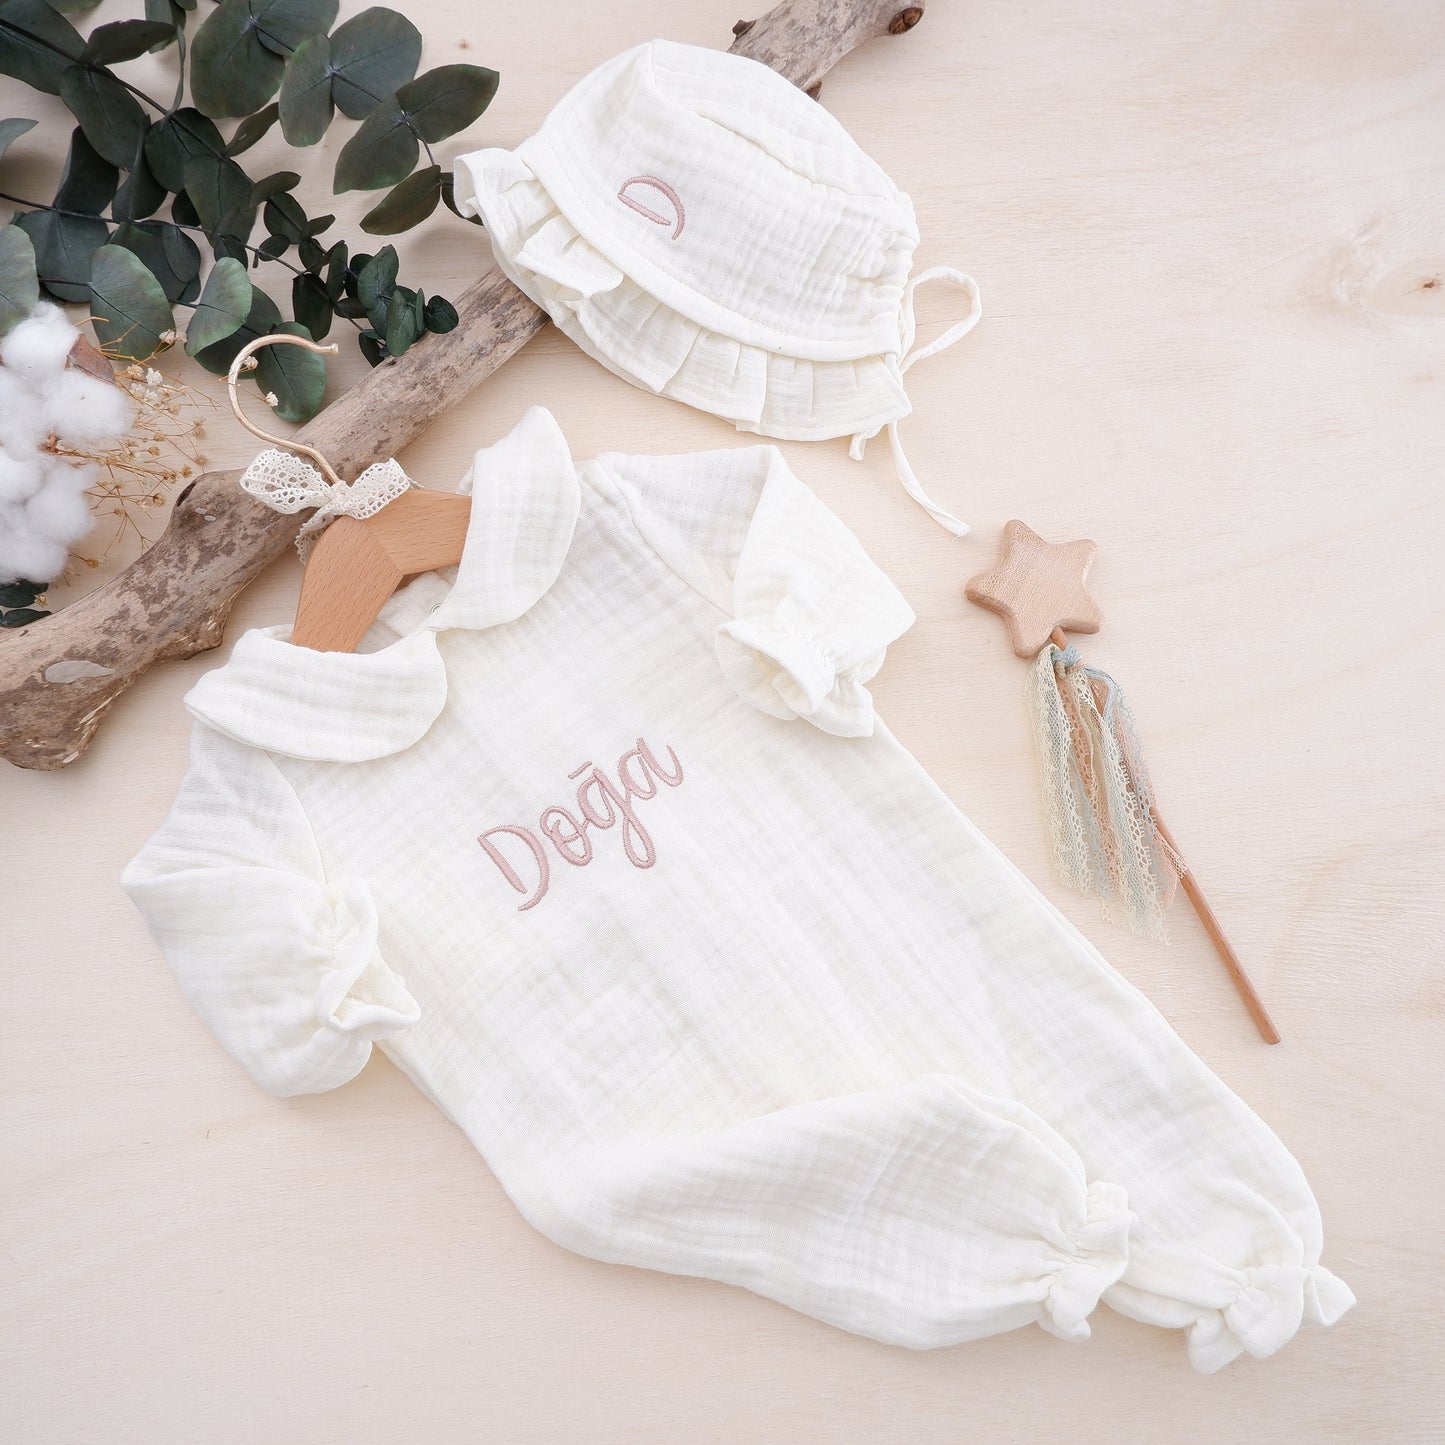 Personalized coming home outfit,Newborn girl coming home outfit, Customized baby girl hospital outfit, Baby girl coming home outfit